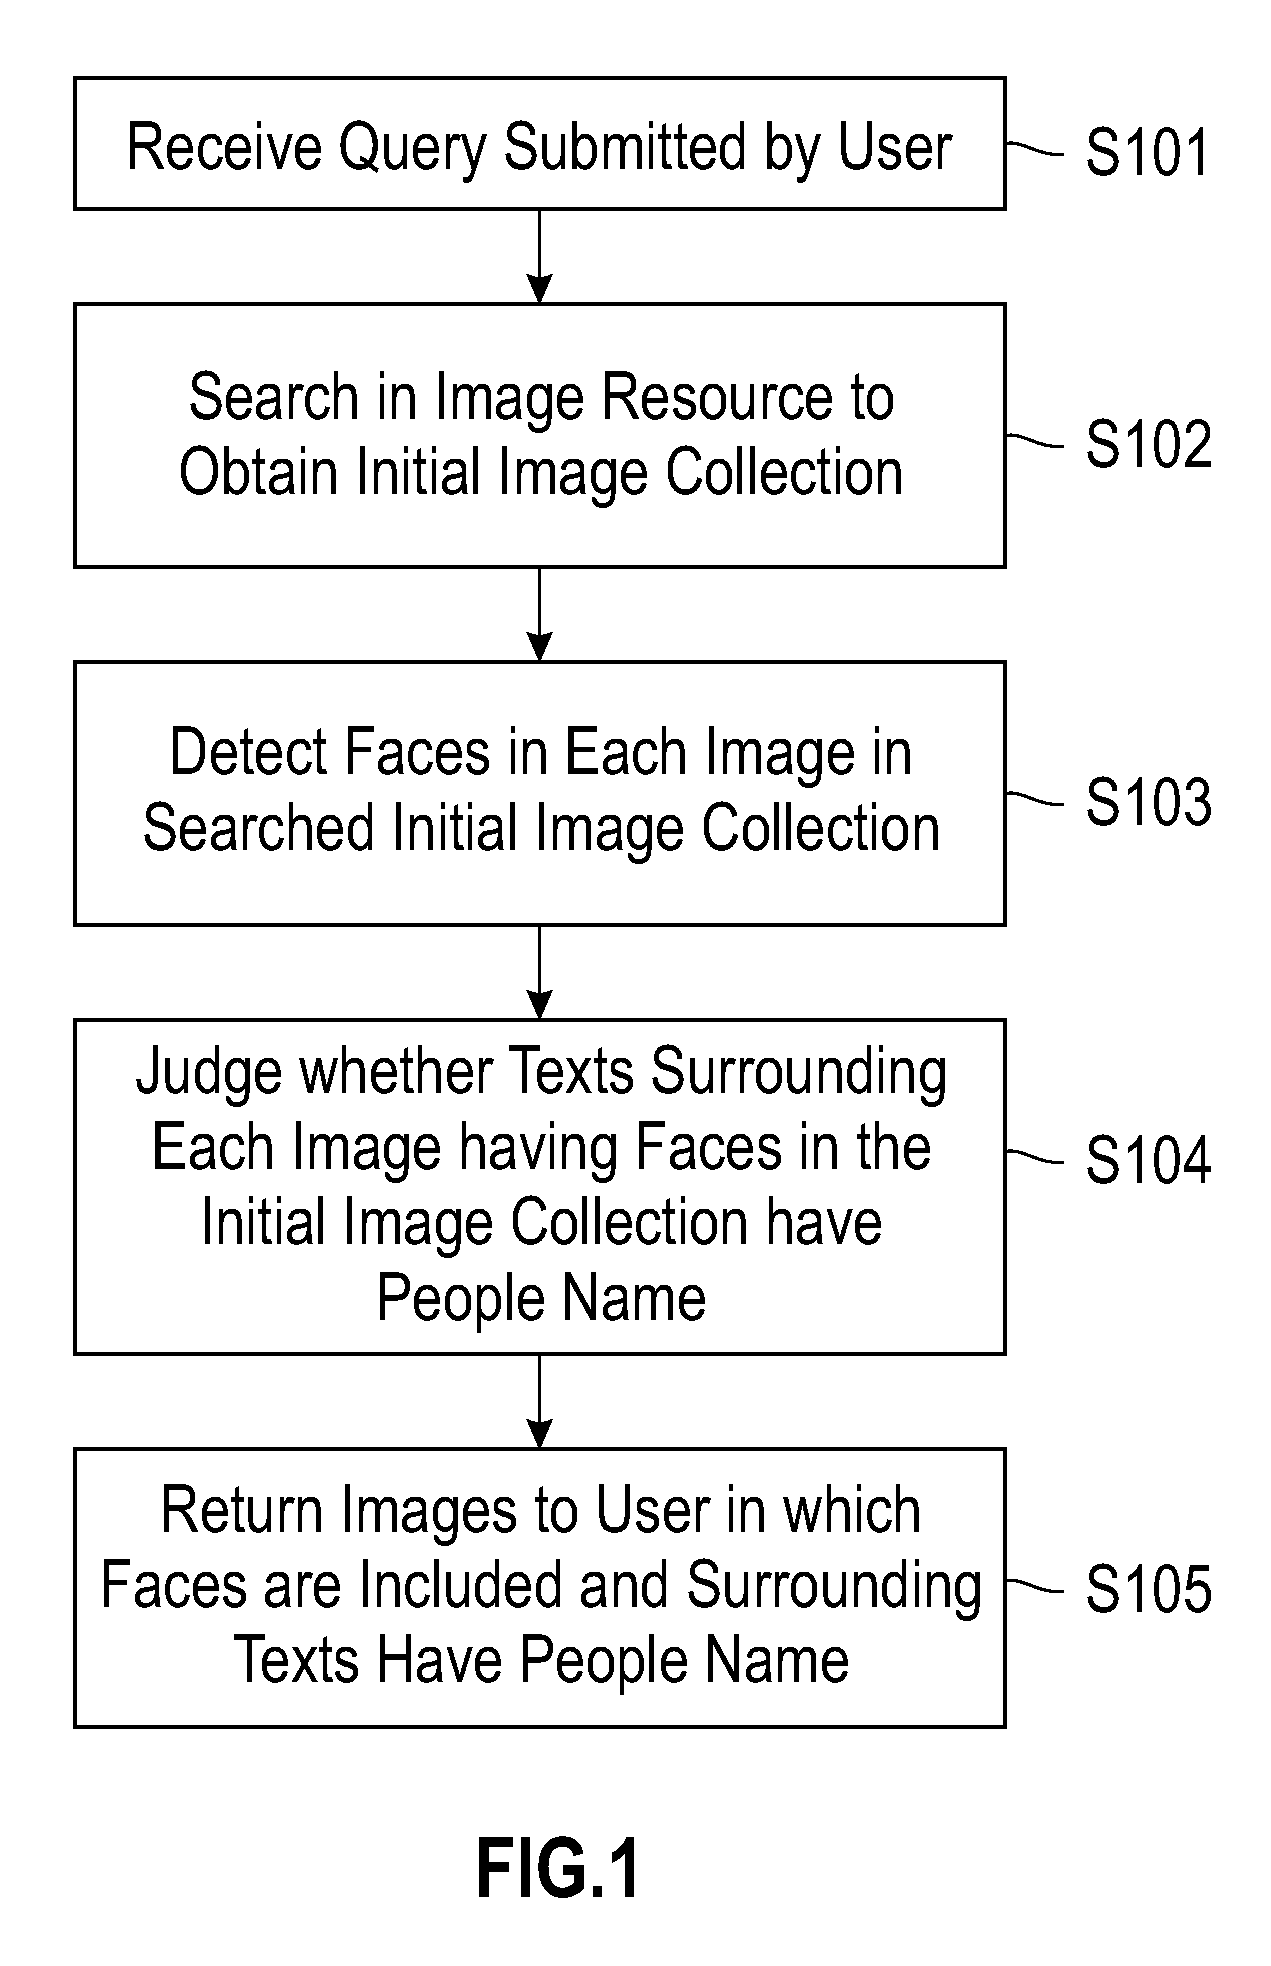 Image search using face detection